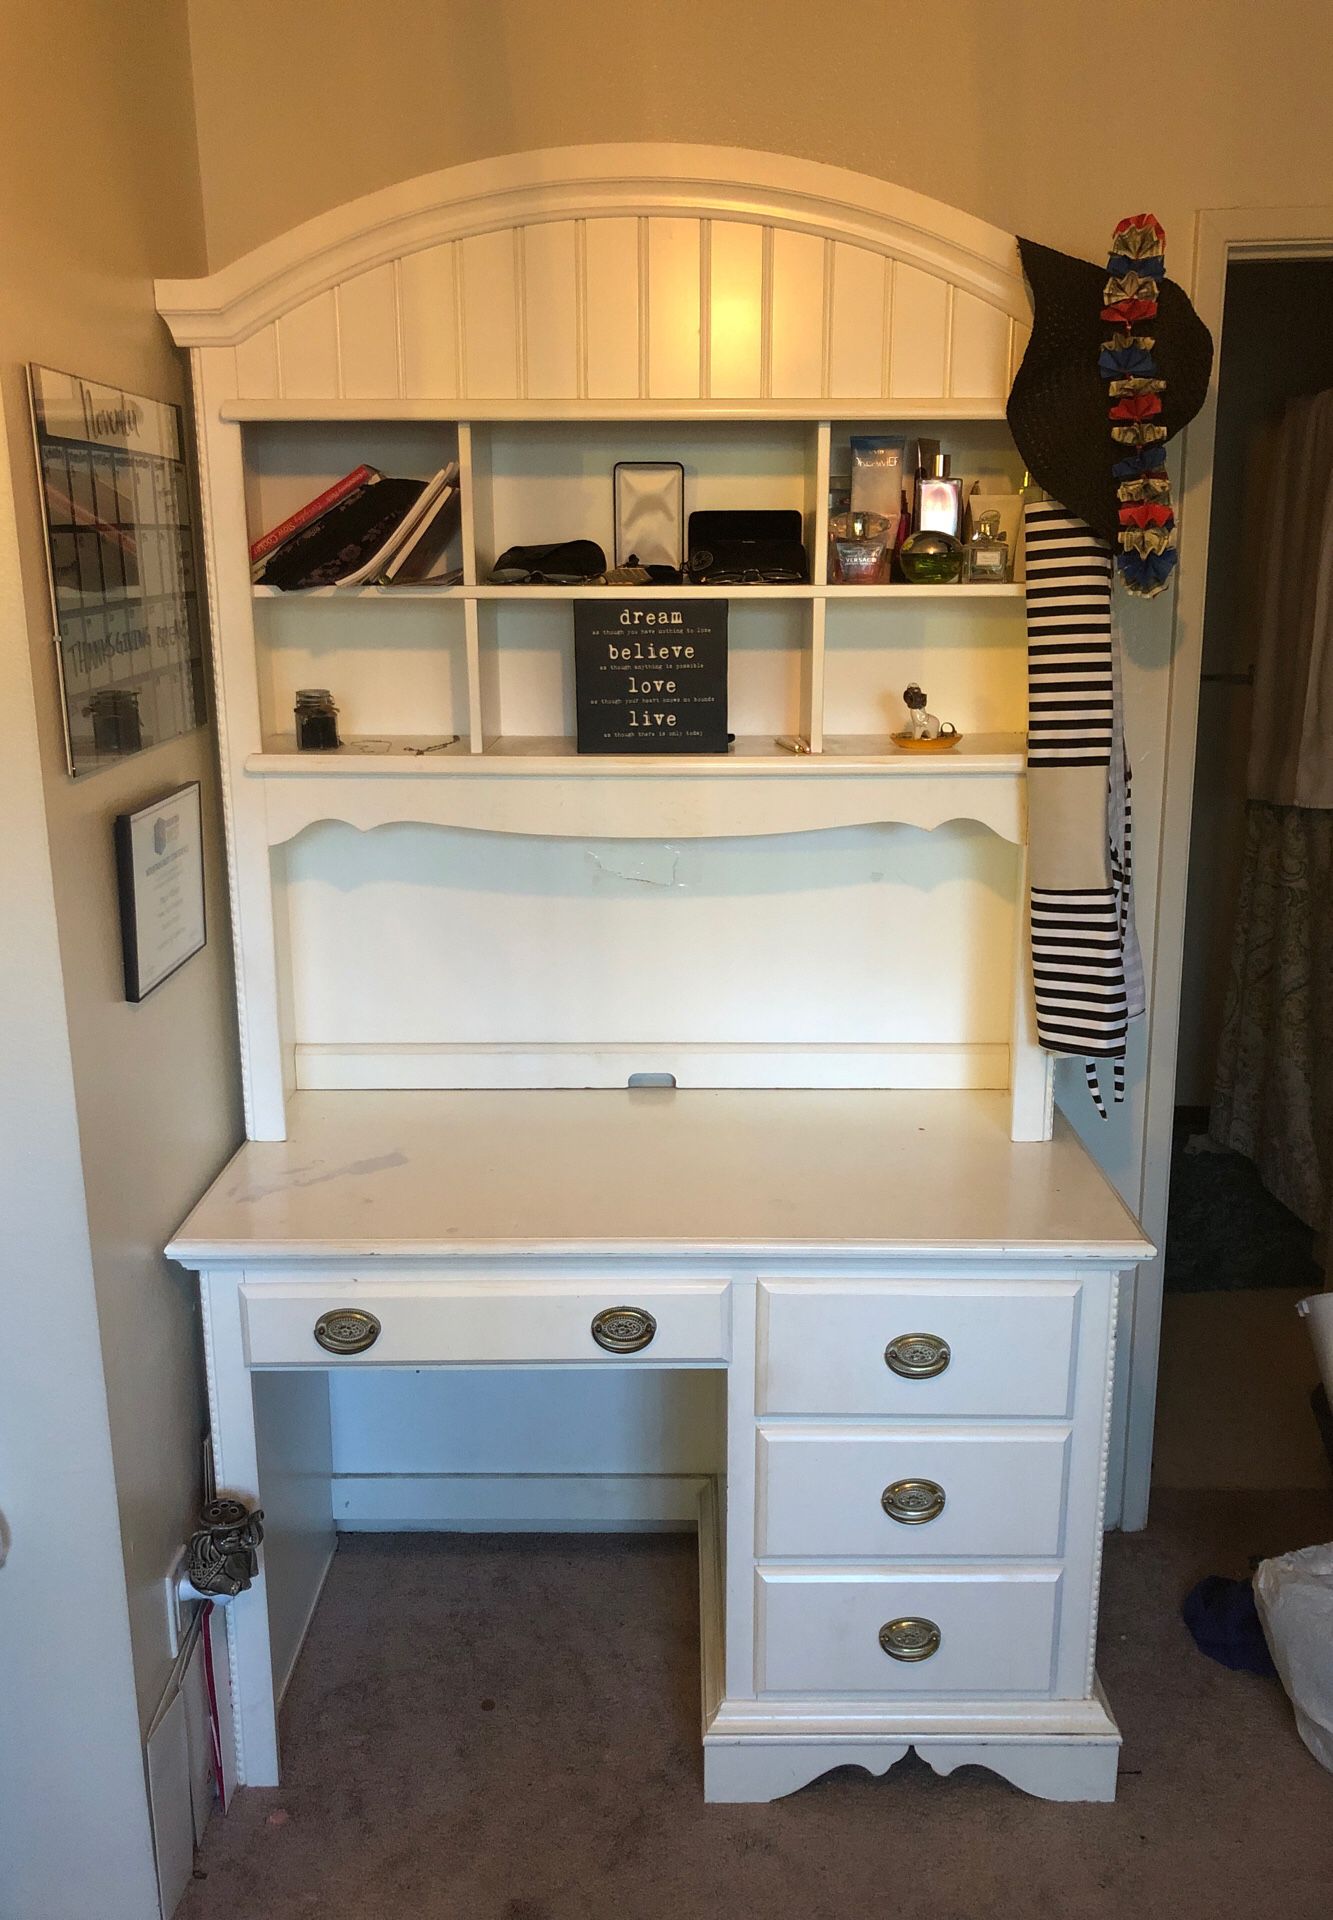 Free pick up by 2pm on 7/20: Desk with top shelves